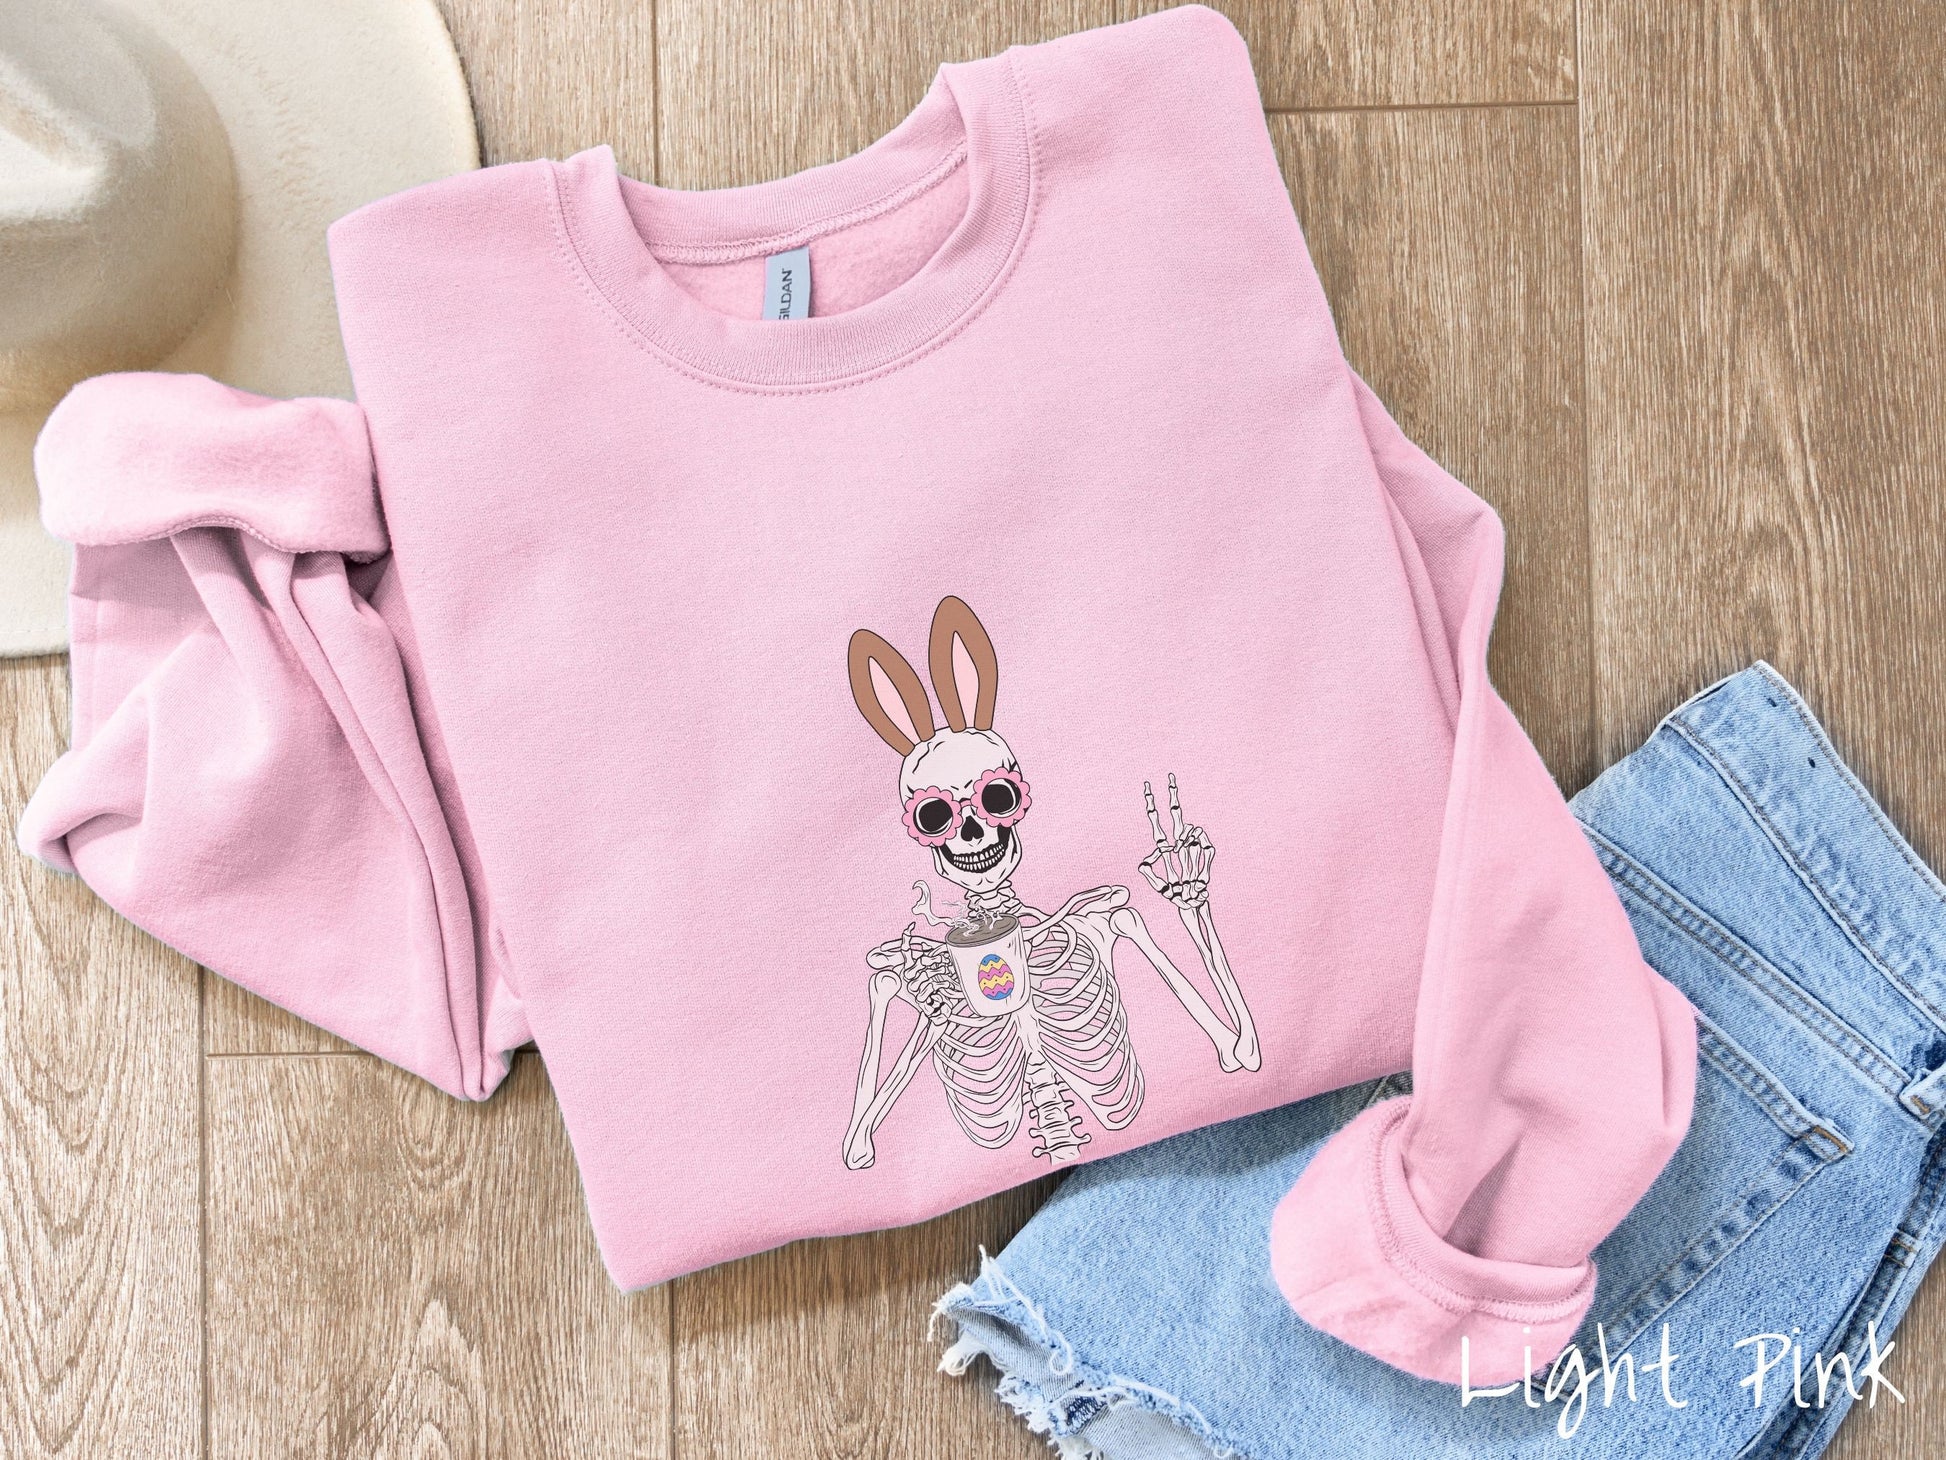 A cute, vintage light pink colored sweatshirt with a pink-toned skeleton wearing pink glasses and brown bunny ears, holding a cup of coffee and holding up a peace sign with the other hand. The white coffee cup has a colorful Easter egg.